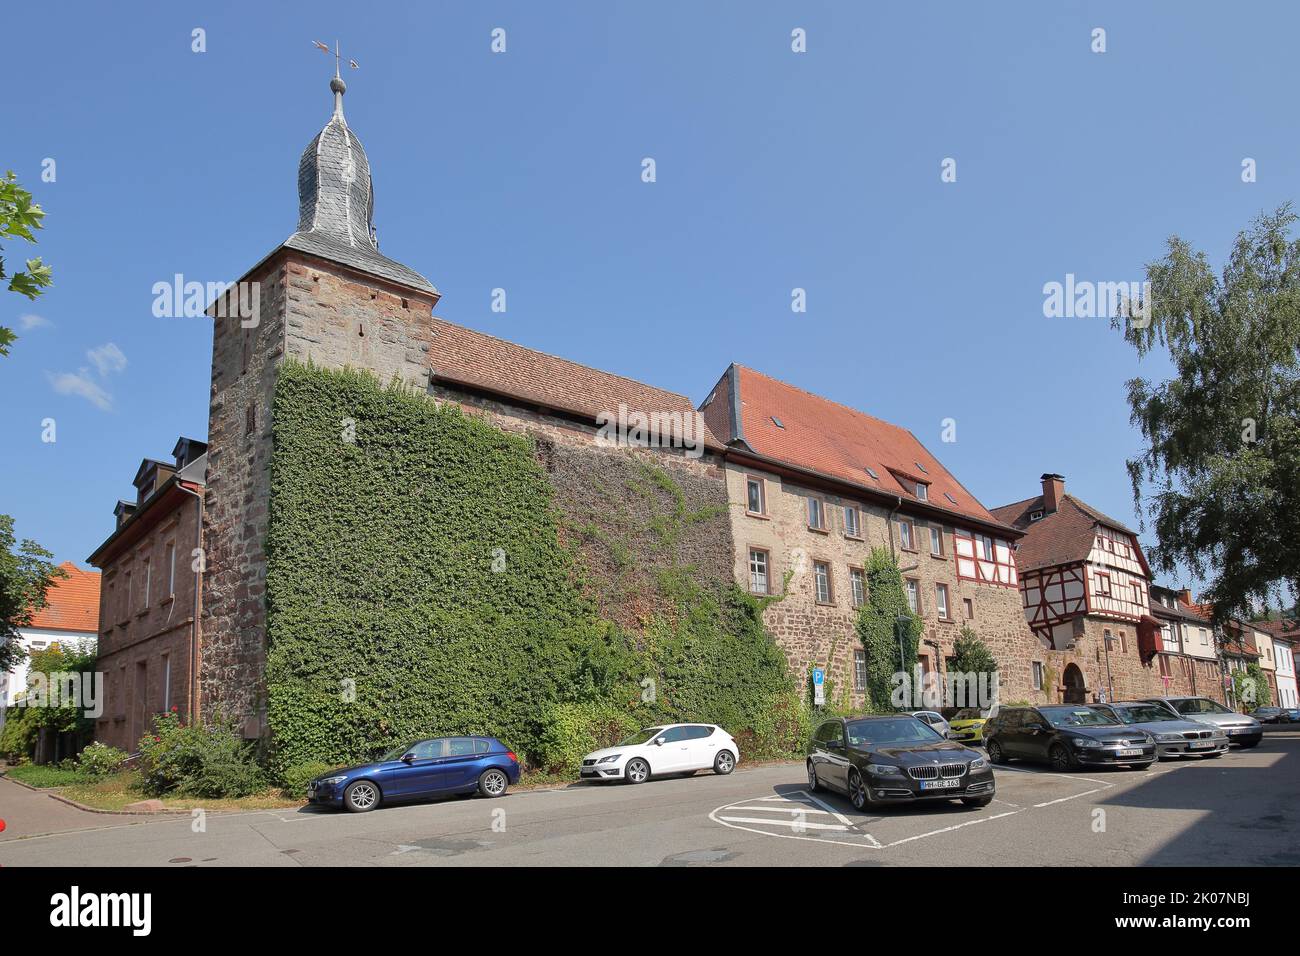 Blue hat and historic town wall in Eberbach, Neckar Valley, Baden-Wuerttemberg, Germany Stock Photo